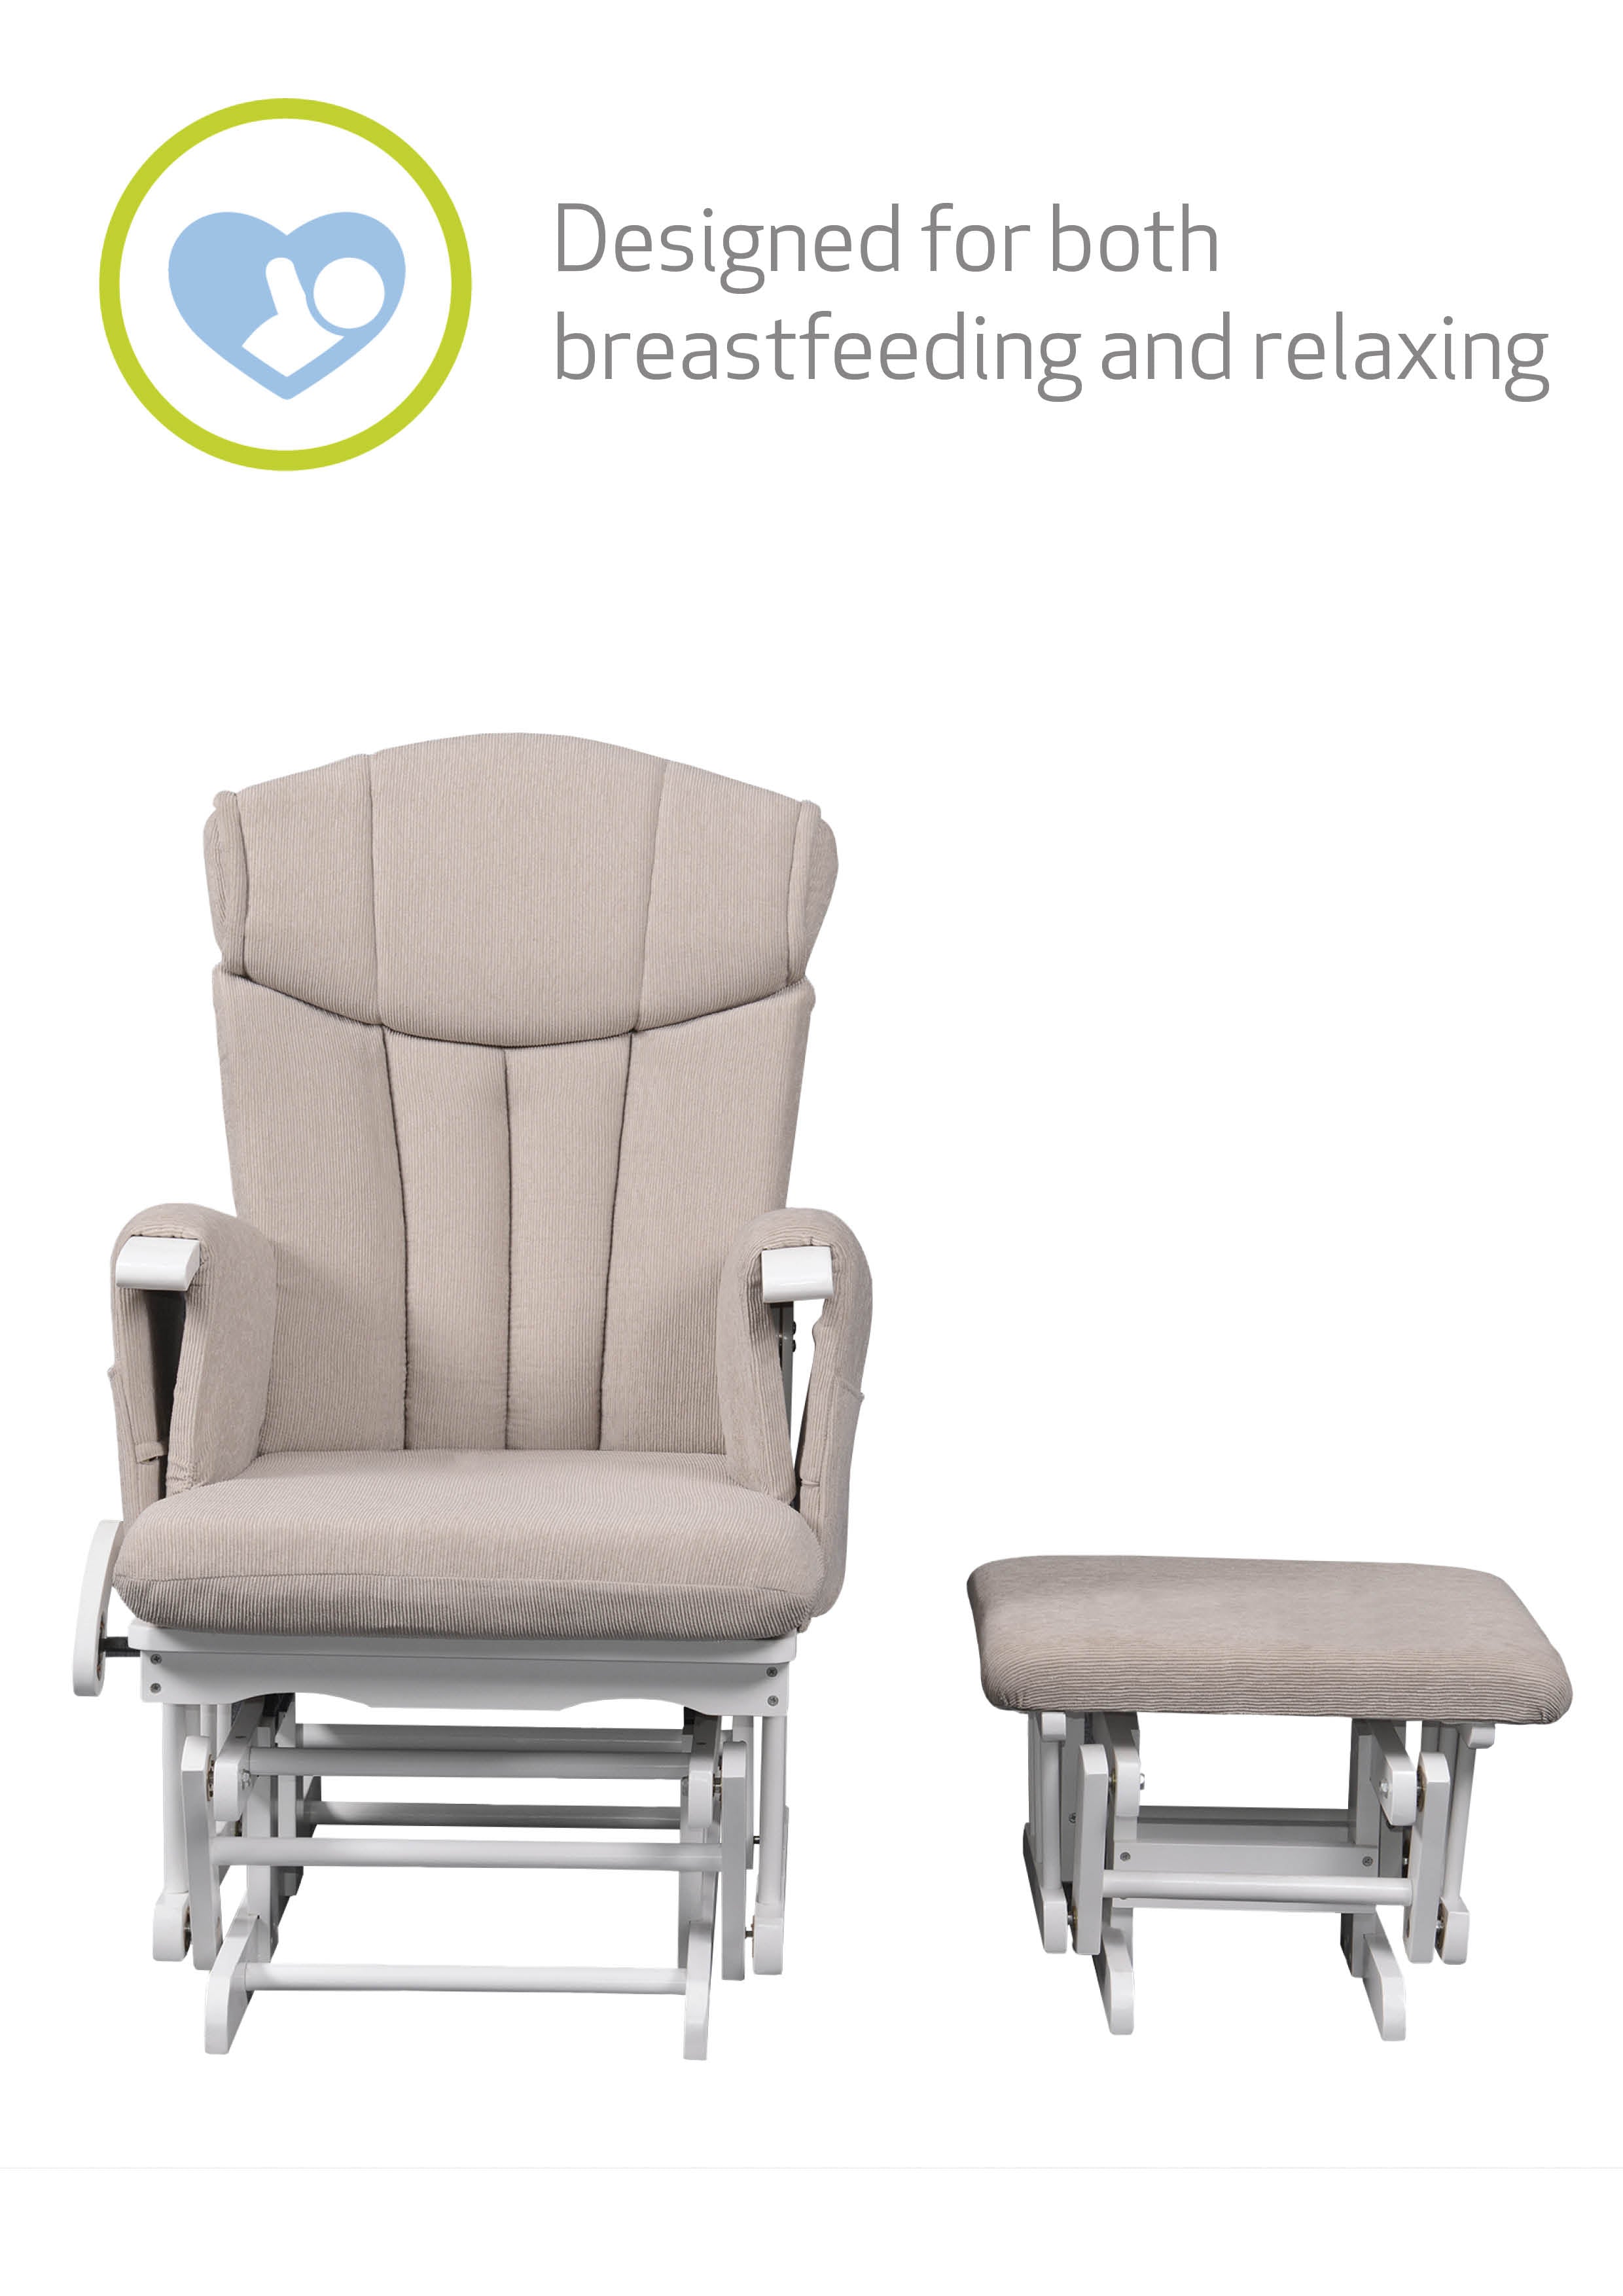 Chatsworth Nursing Chair and Footstool - White Cappuccino- 50% OFF